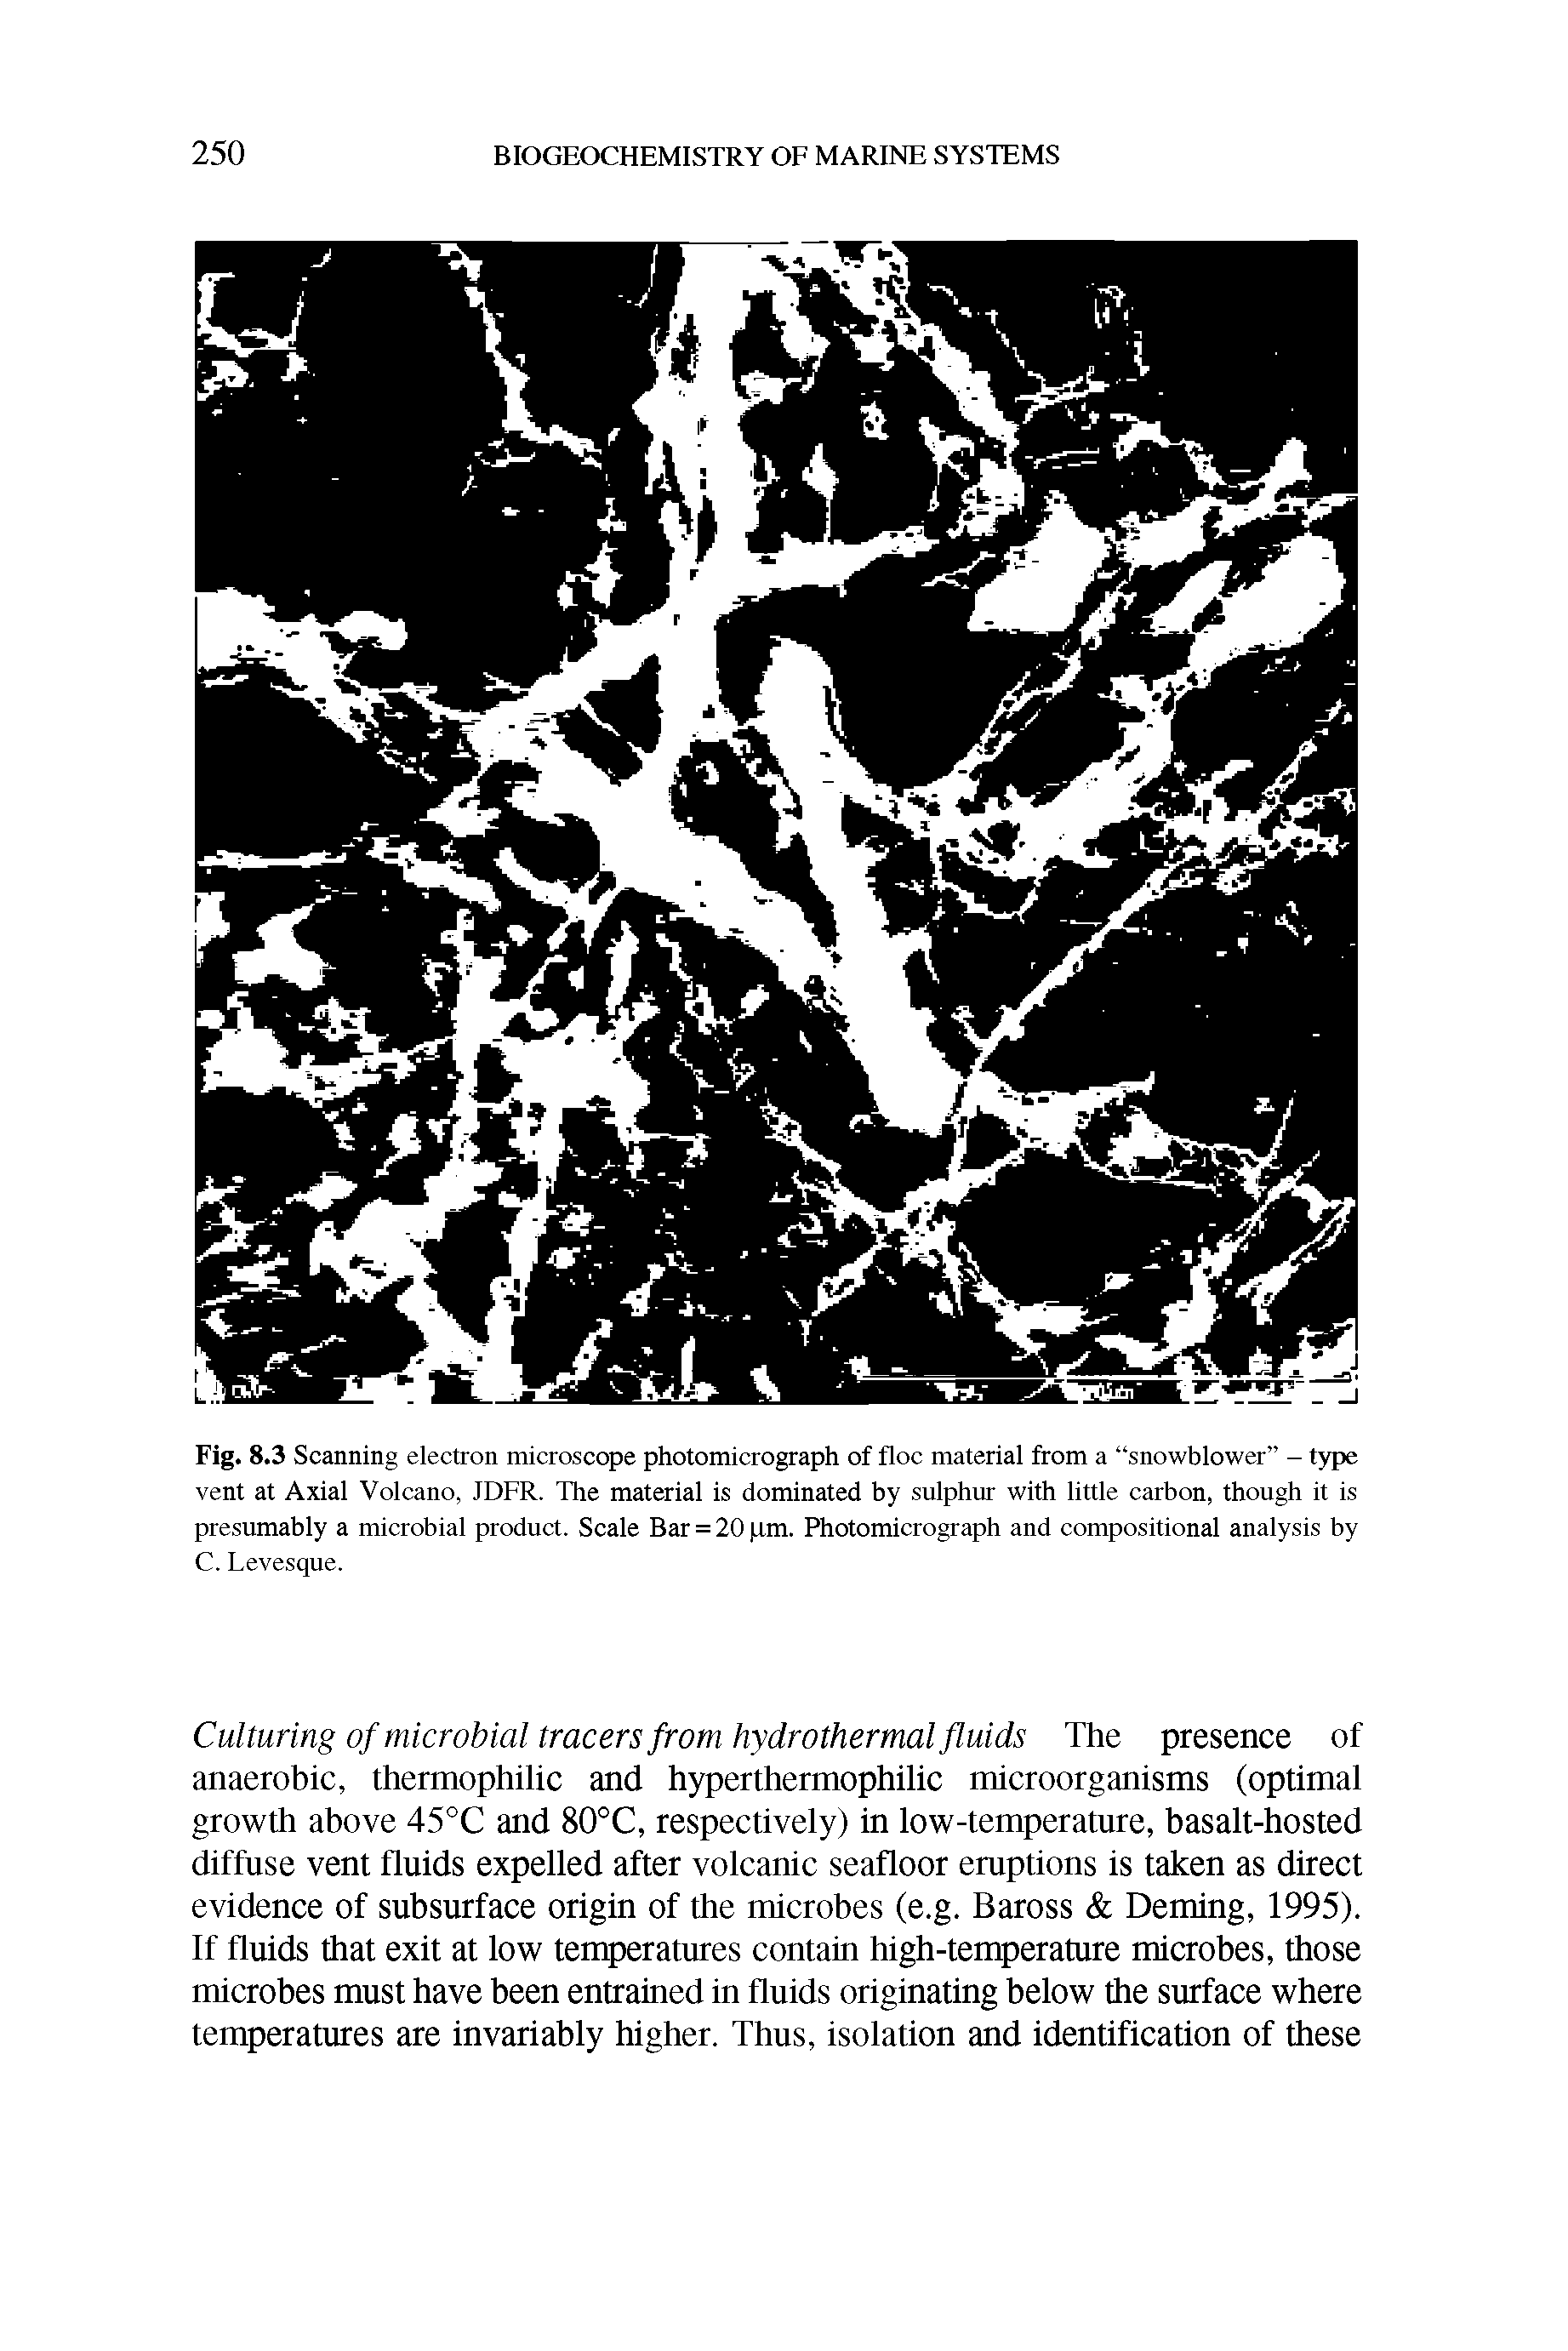 Fig. 8.3 Scanning electron microscope photomicrograph of floe material from a snowblower - type vent at Axial Volcano, JDFR. The material is dominated by sulphur with little carbon, though it is presumably a microbial product. Scale Bar = 20 pm. Photomicrograph and compositional analysis by C. Levesque.